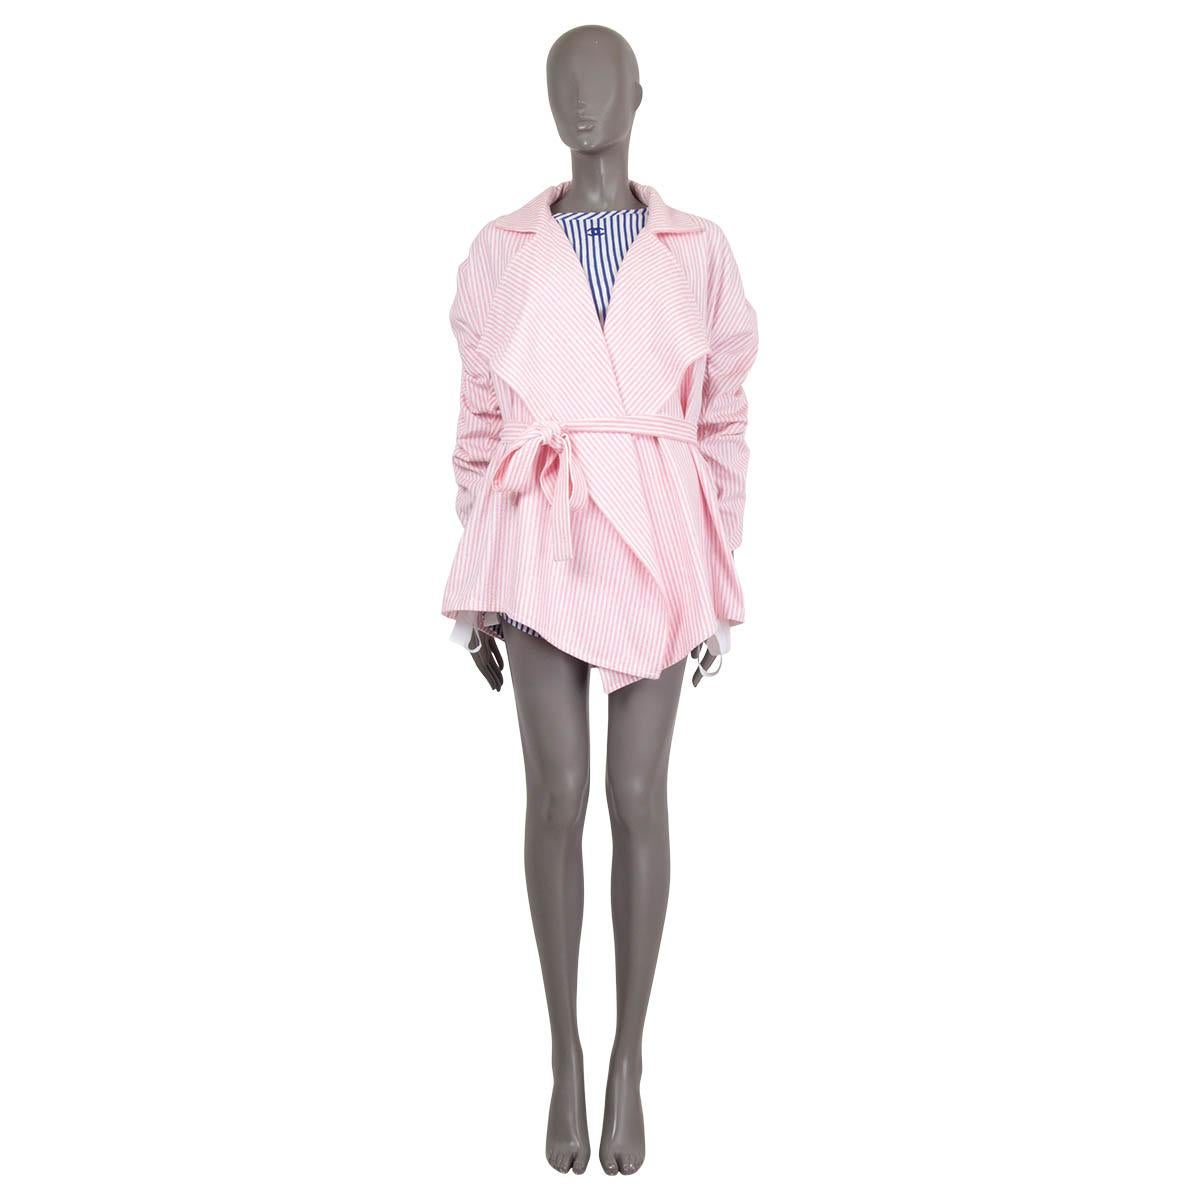 100% authentic Chanel belted terrycloth jacket in pink and white cotton (83%), polyamide (15%) and elastane (2%). Features adjustable sleeves and a draping collar. Unlined. Has been worn and is in excellent condition.

2019 La Pausa Resort

See